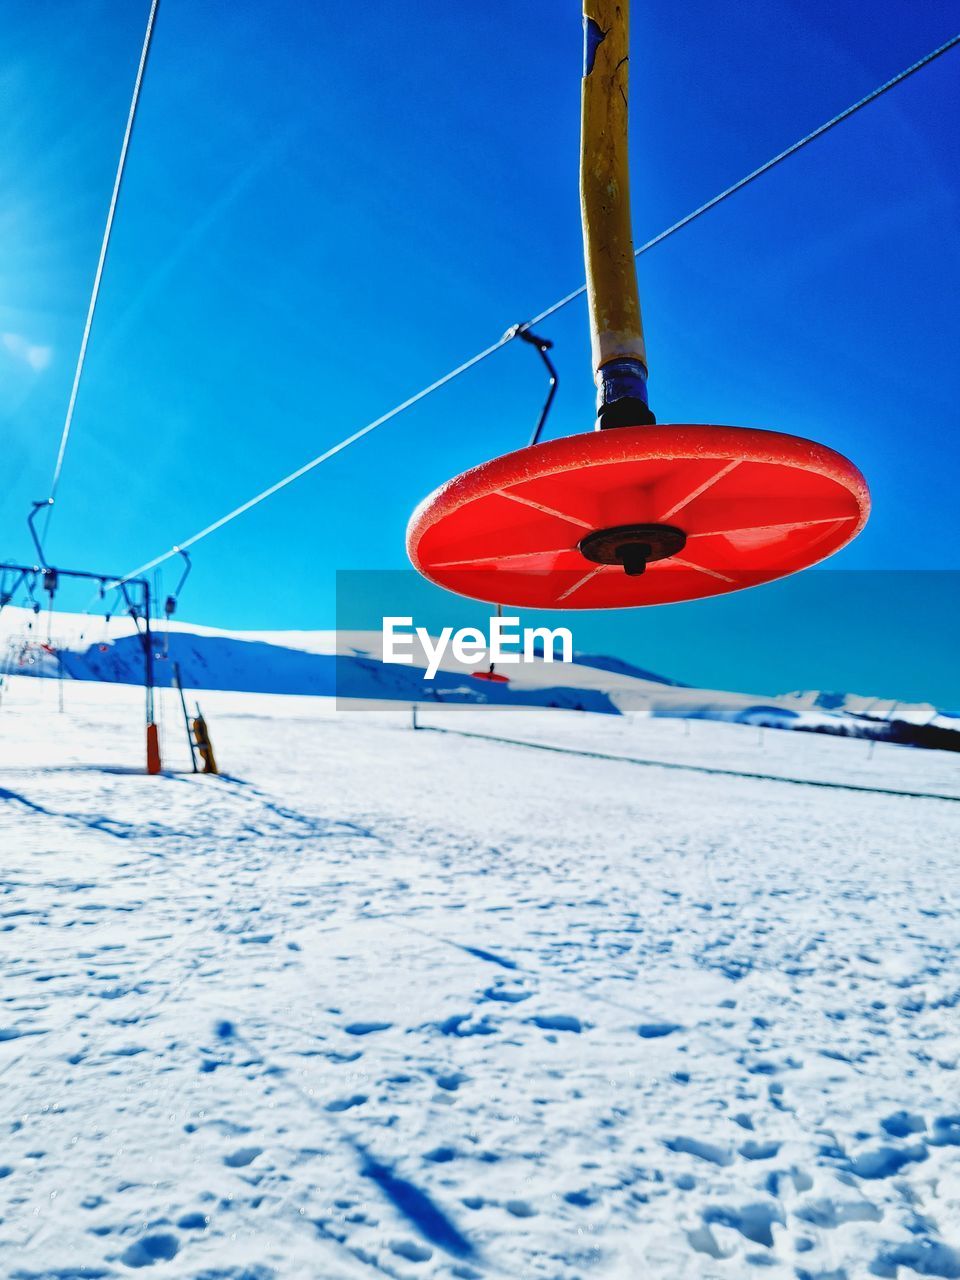 SKI LIFT OVER SNOW COVERED FIELD